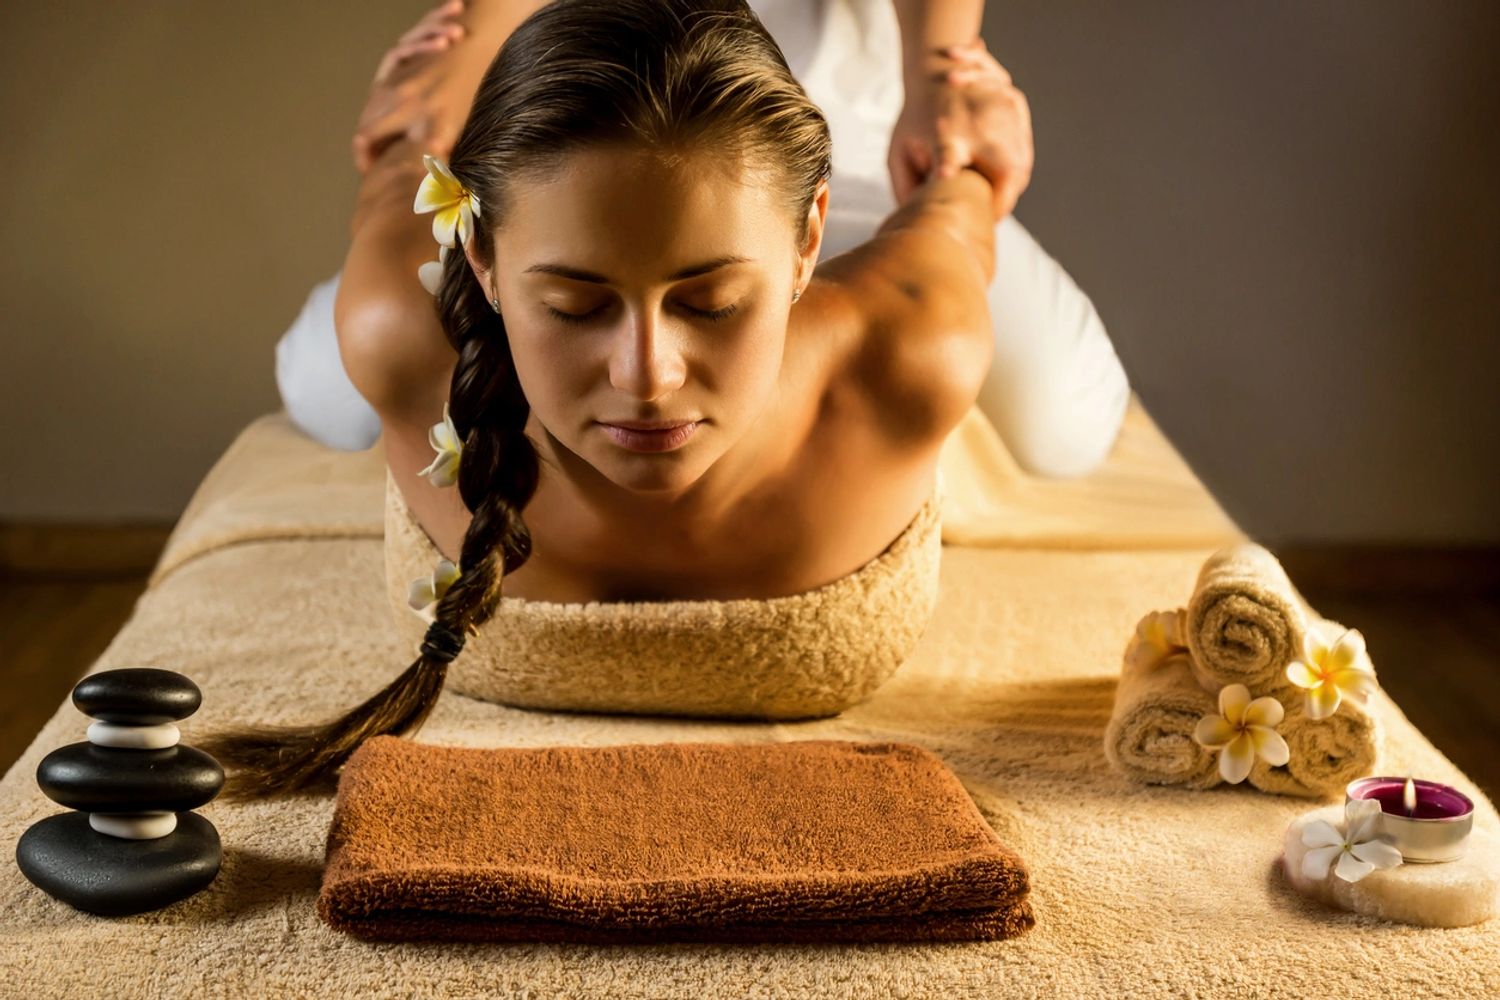 Jaidee Thai Massage in Spring, TX offers professional massage therapy to help you relax and heal.